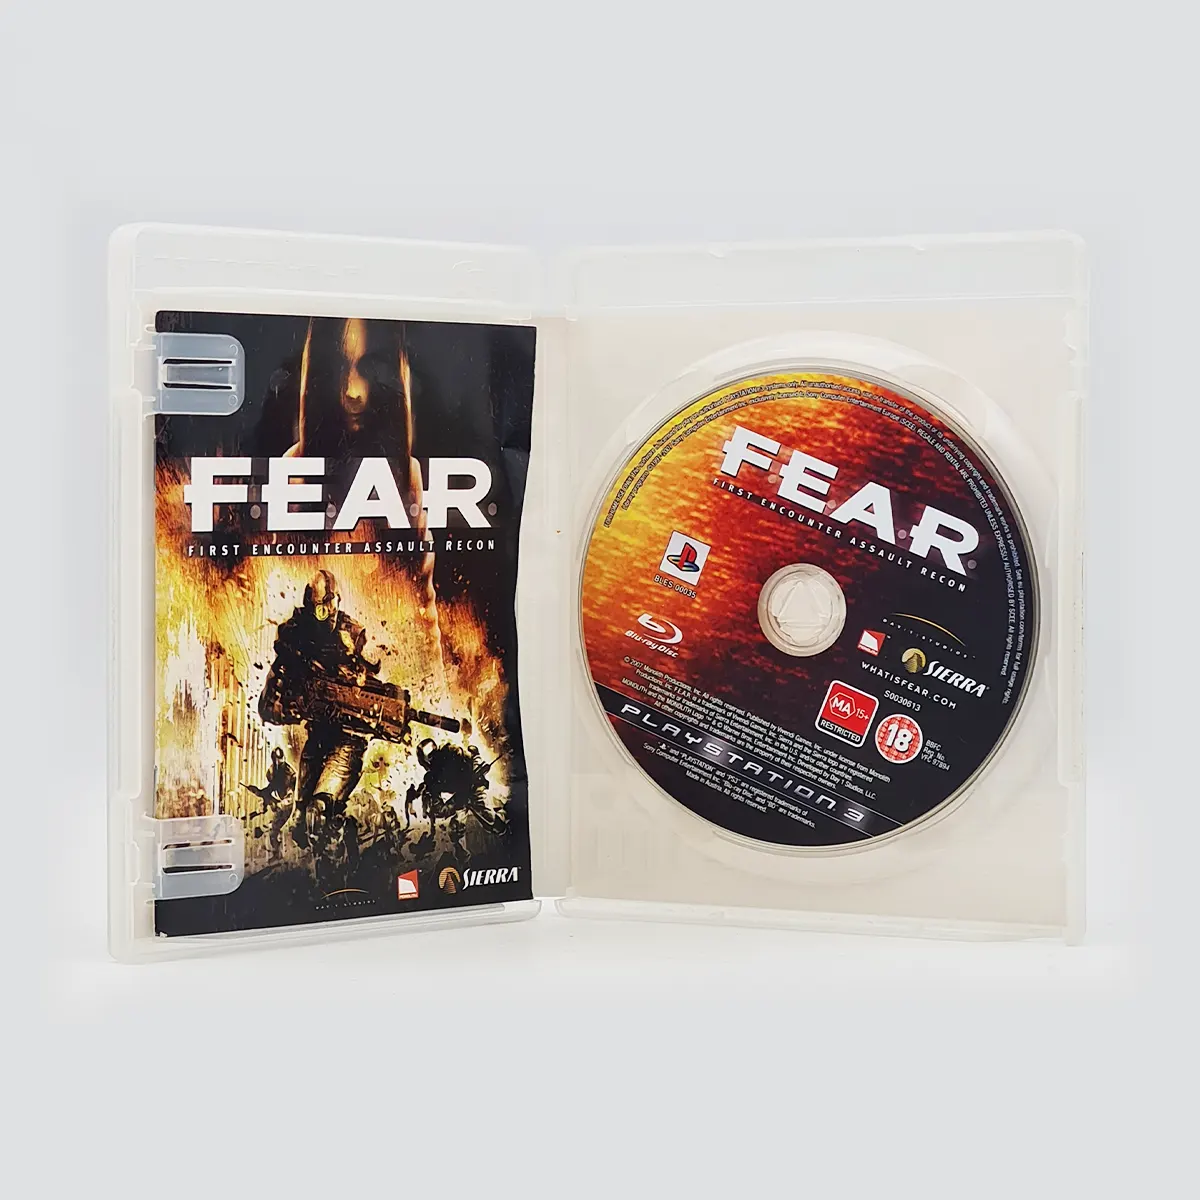 FEAR PS3 1